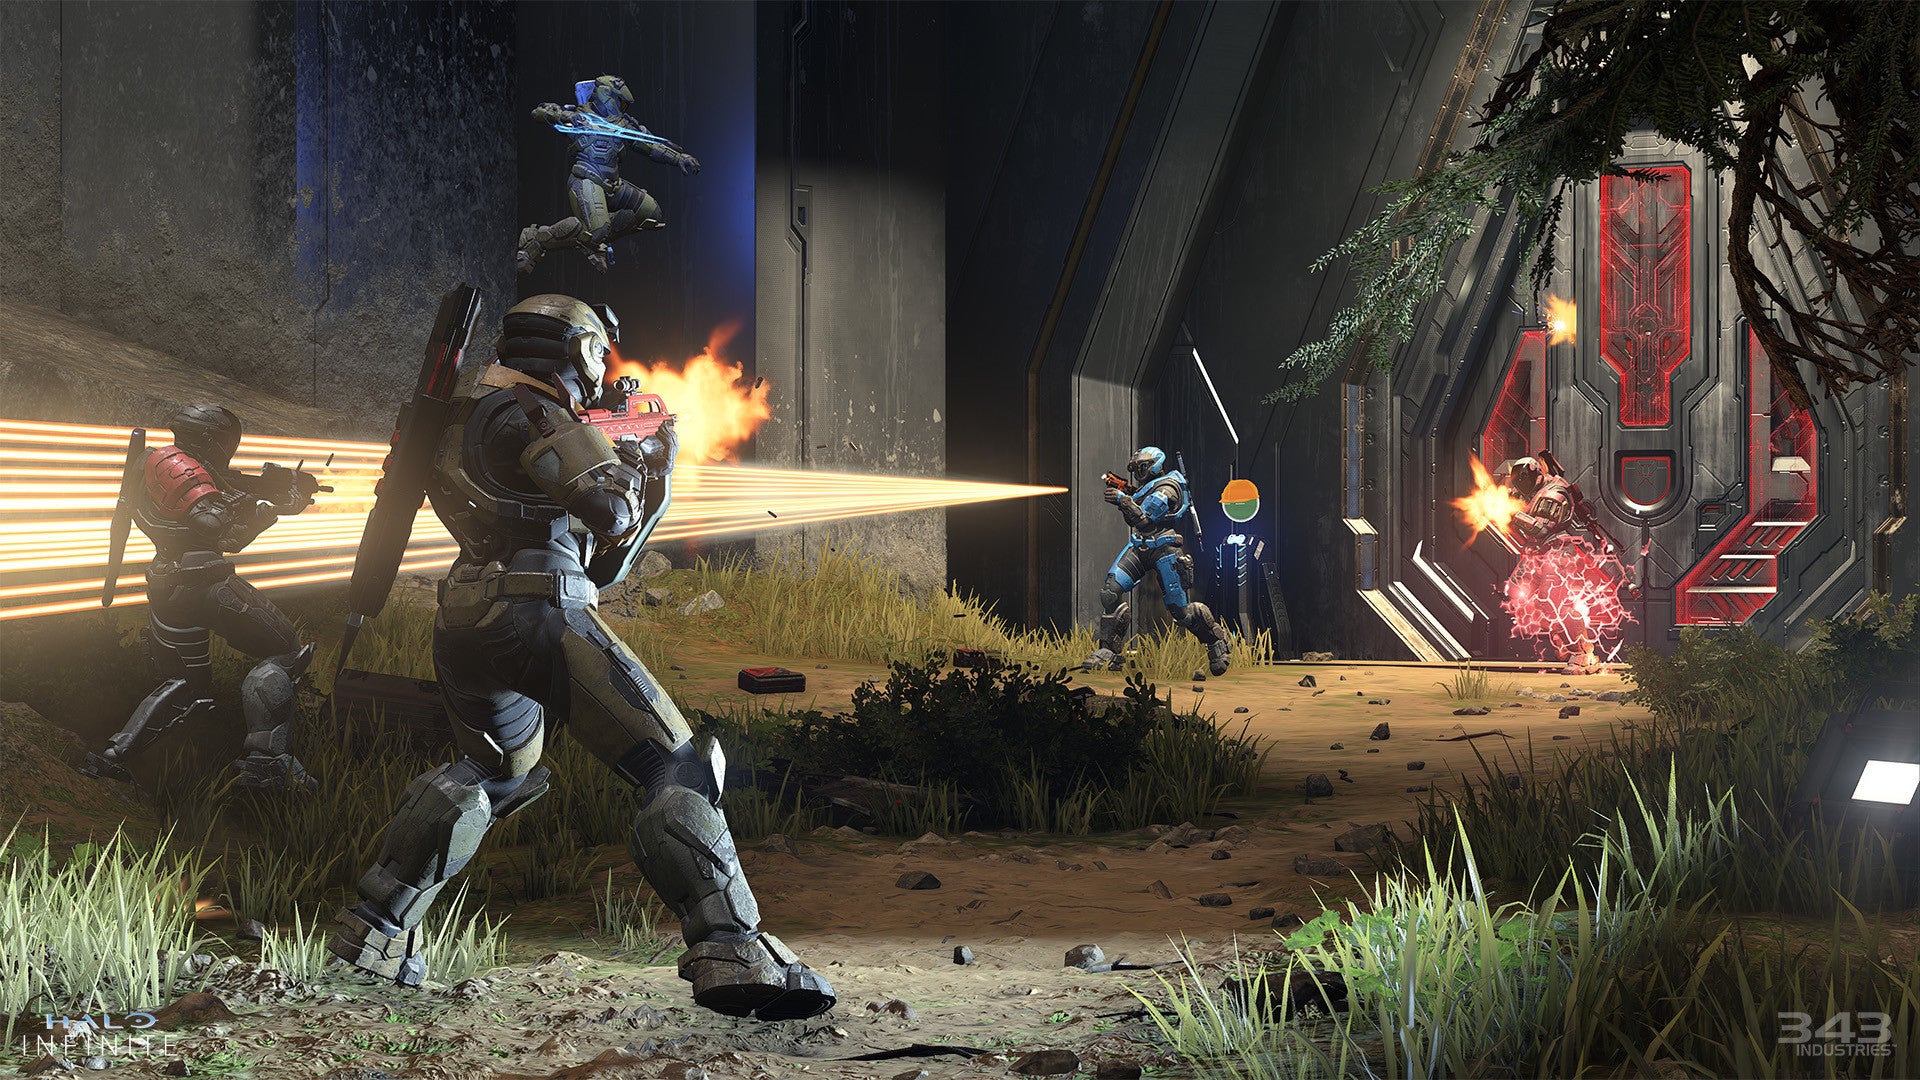 A group of Spartans in battle wielding a variety of weapons, including (prominently) a laser beam.